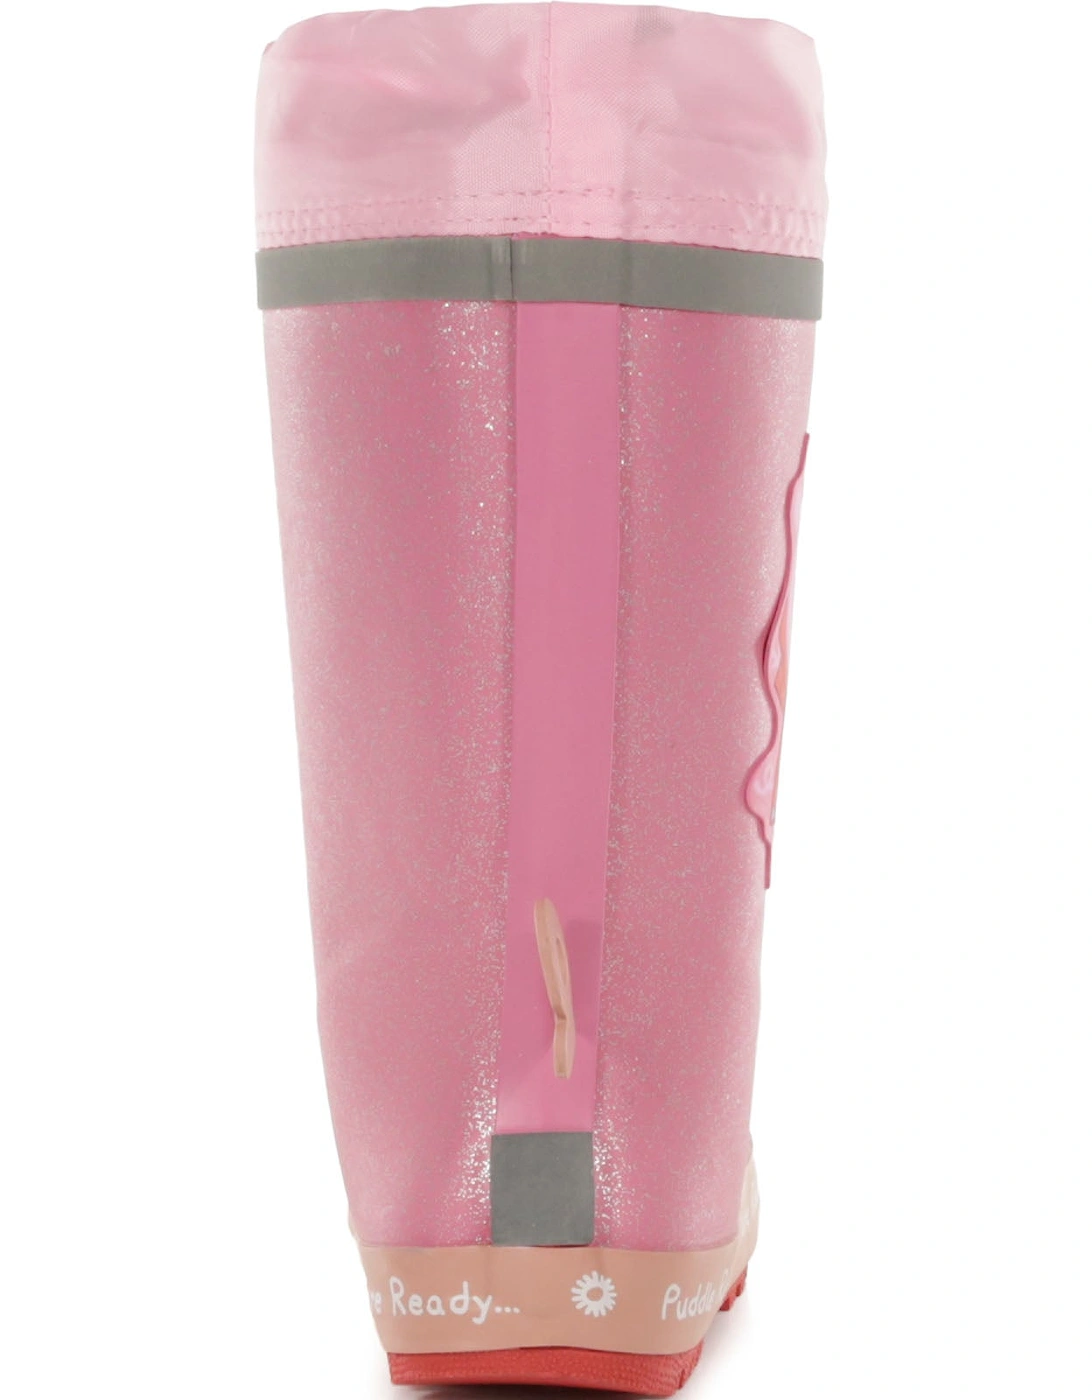 Kids Peppa Pig Puddle Outdoor Rain Boots Wellies